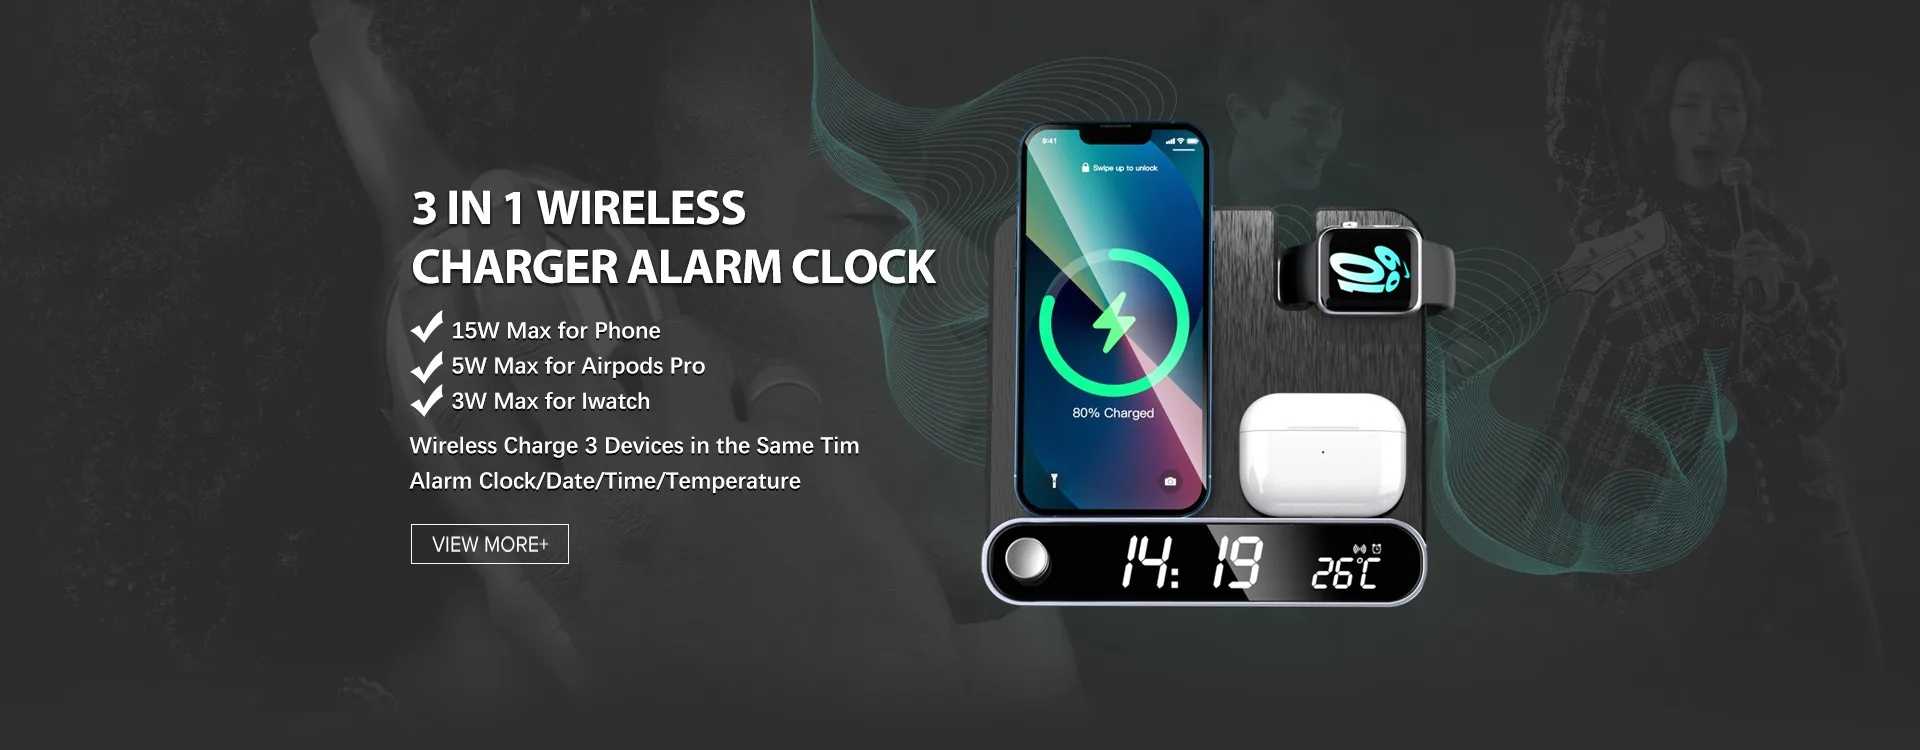 3 in 1 wireless charger alarm clock